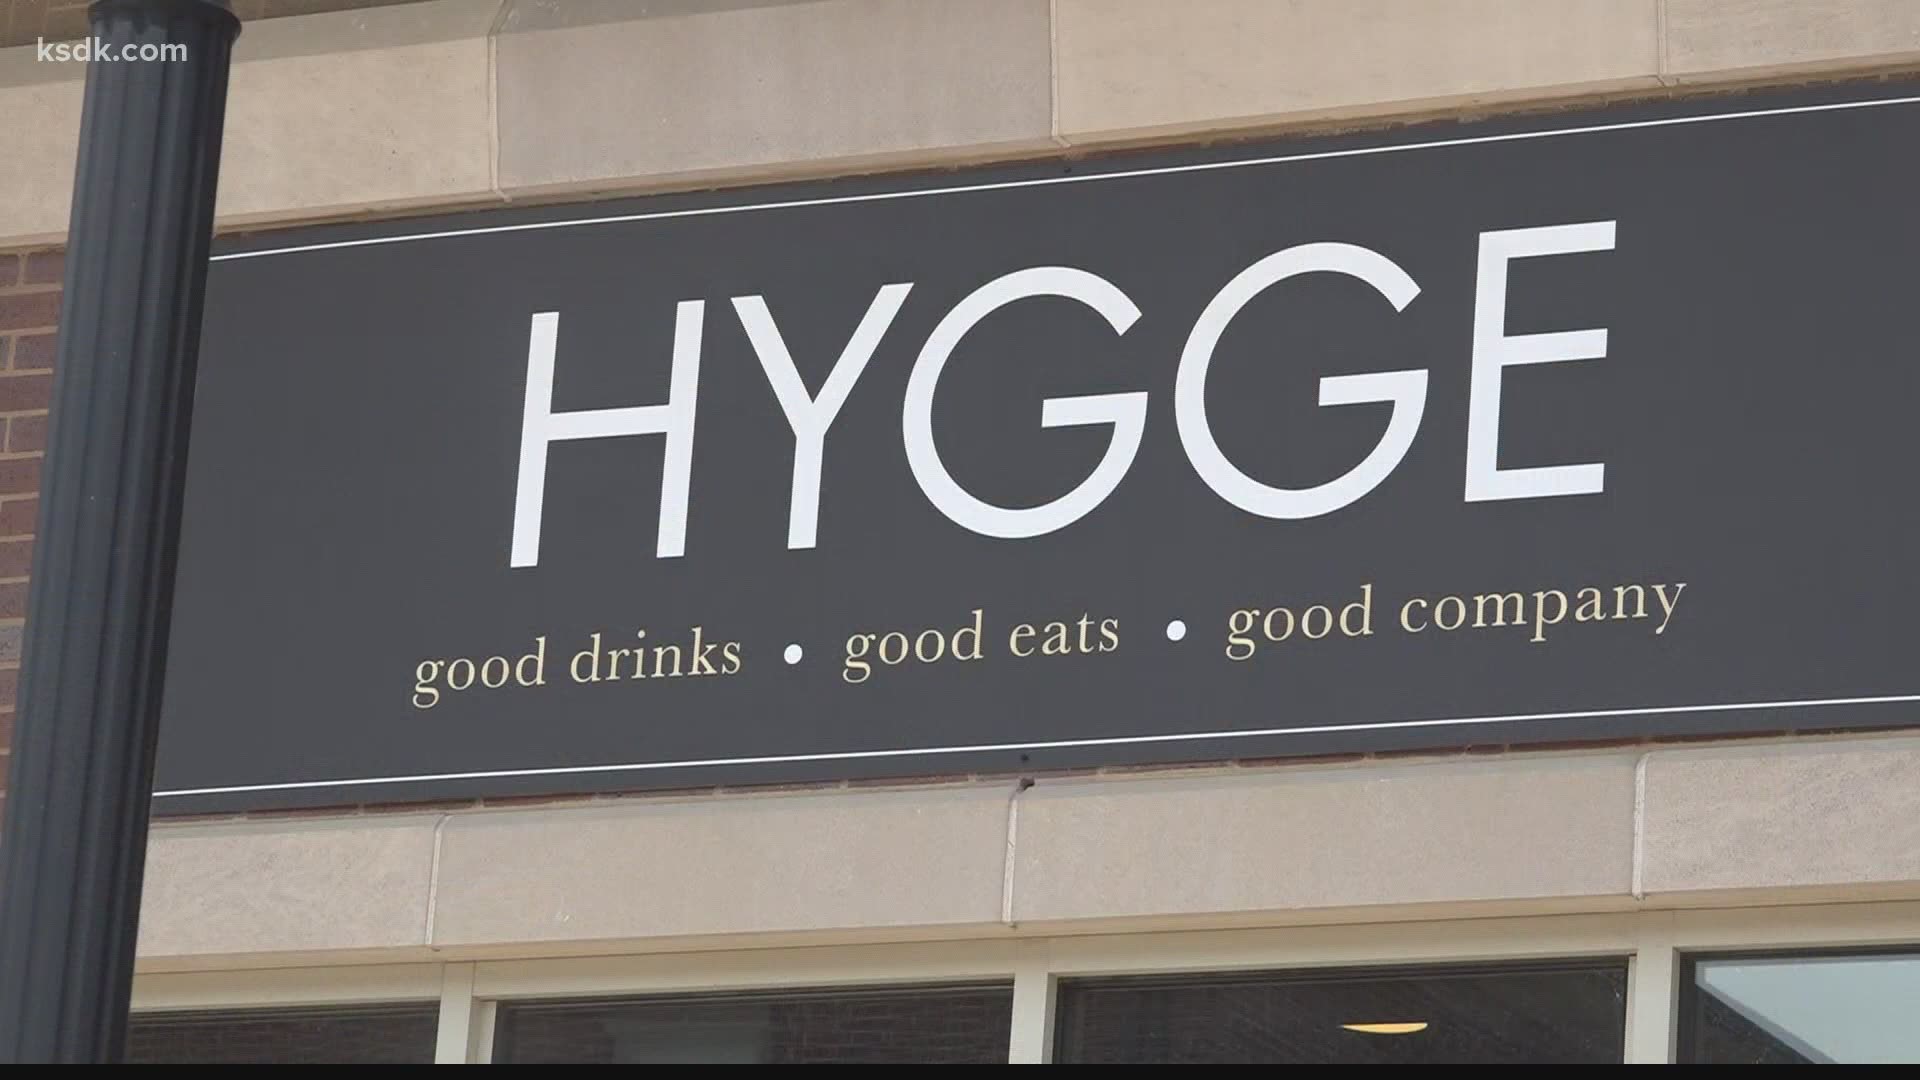 Hygge serves pressed juices, smoothies, acai bowls, immunity shots, healthy eats, coffee, tea and more.